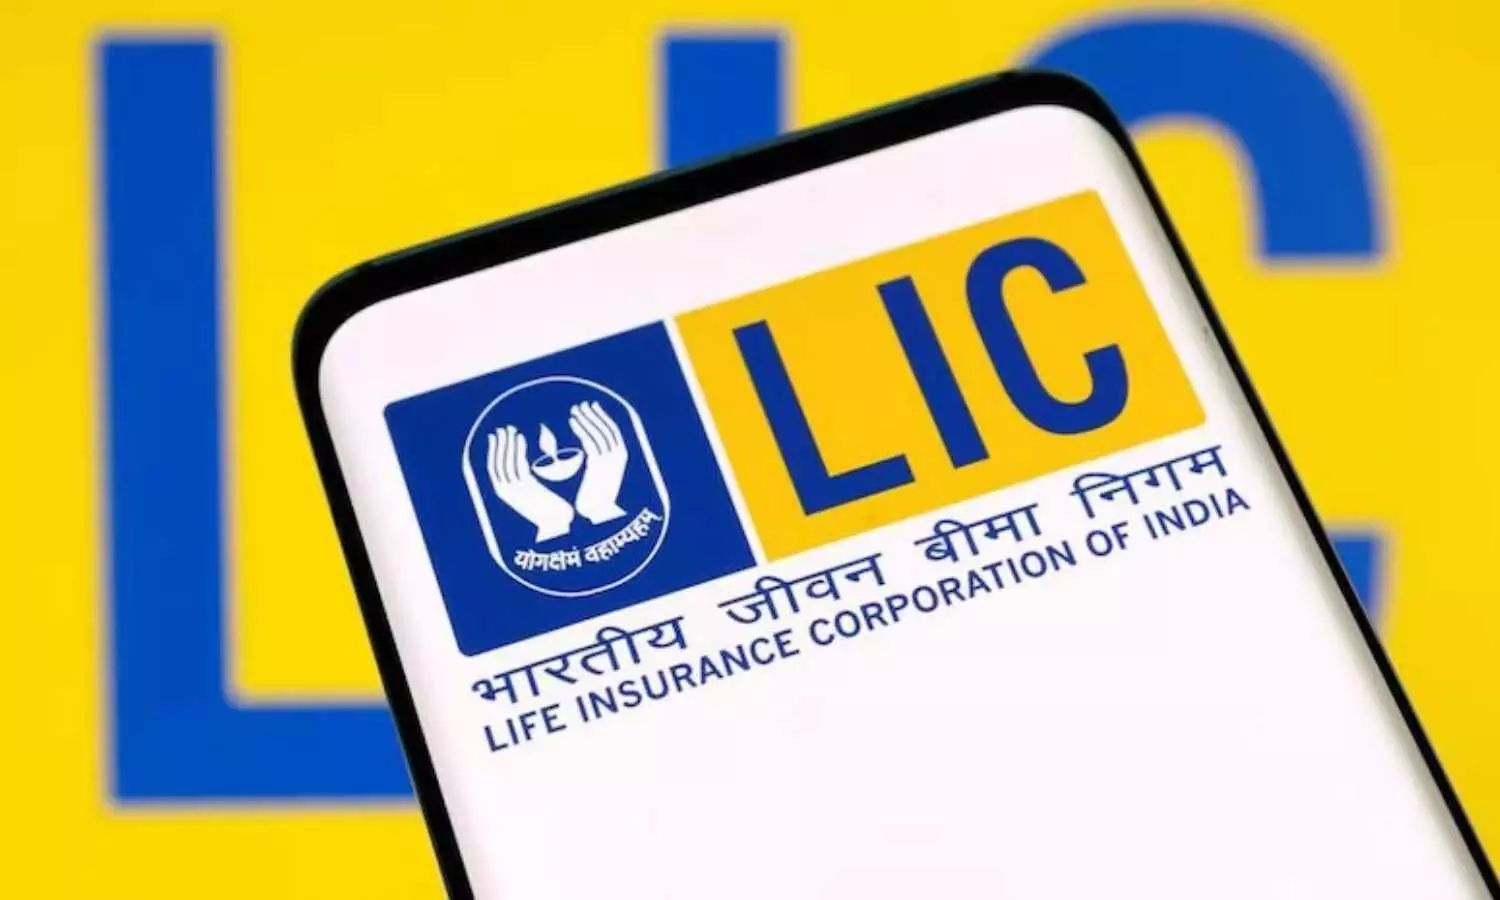 LIC: The 4th most valuable brand in India; should you invest?